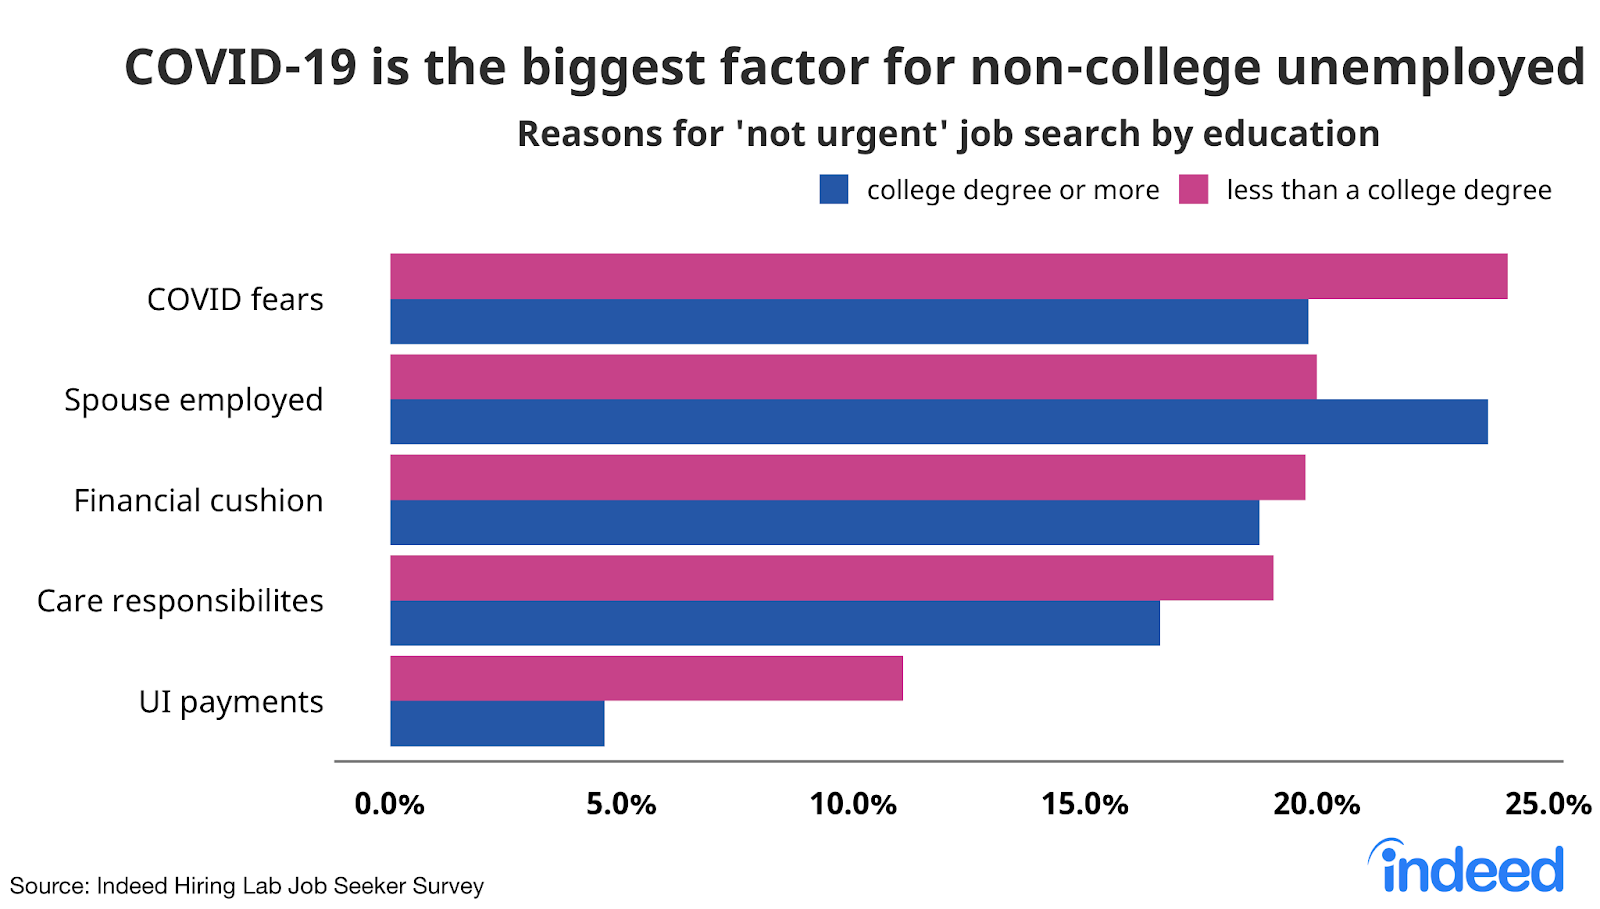 Bar chart titled “COVID & UI are bigger factors for non-college unemployed.”